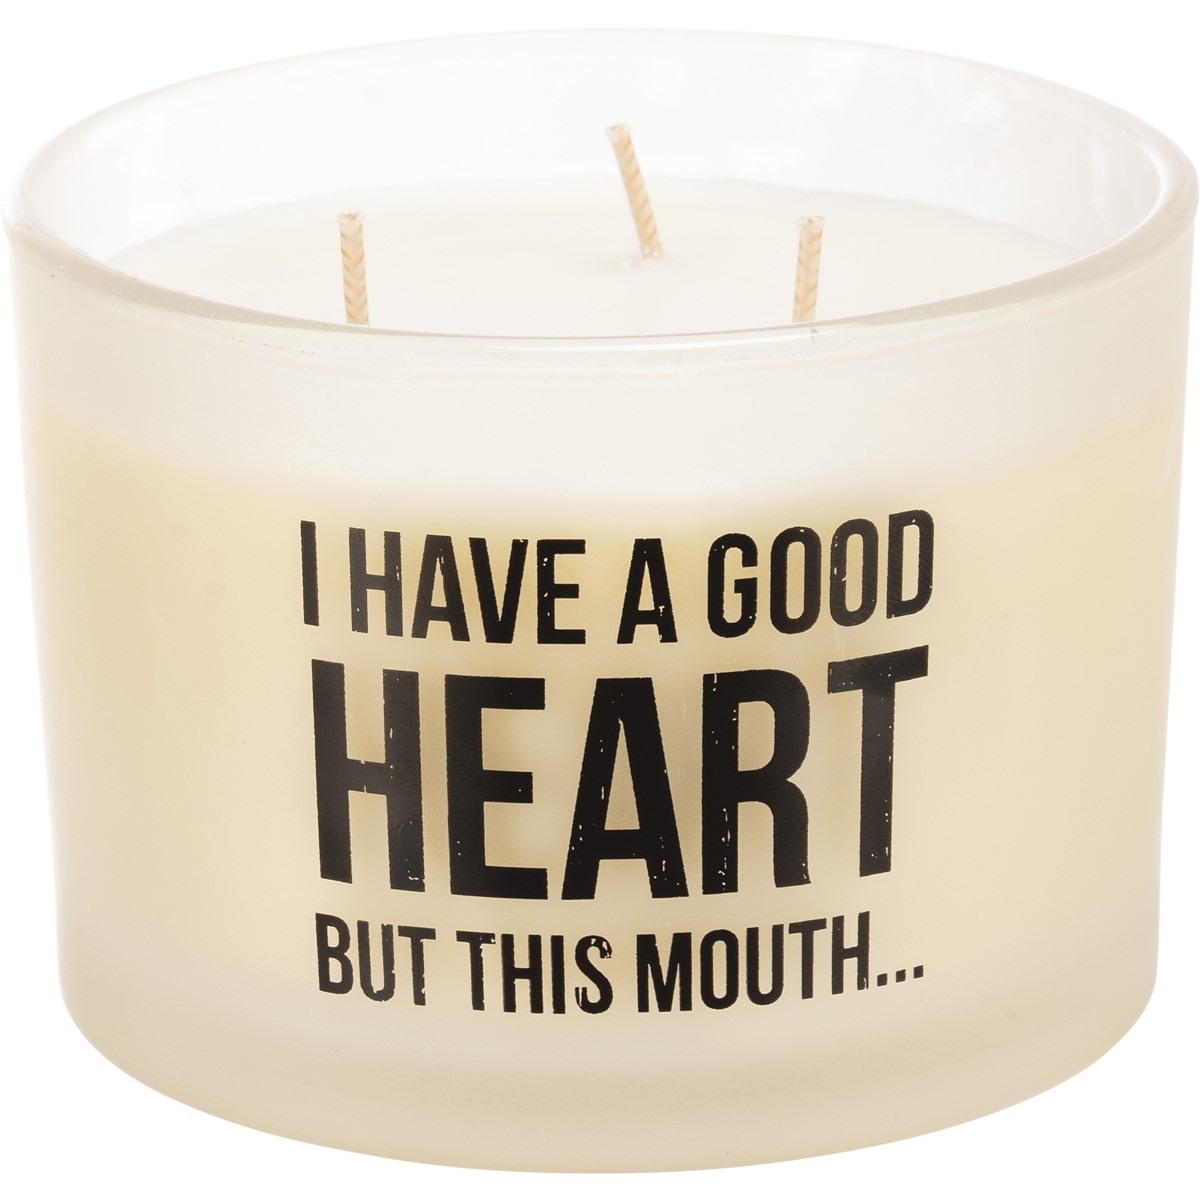 I Have A Good Heart But This Mouth Jar Candle - Soy Wax, Glass, Cotton